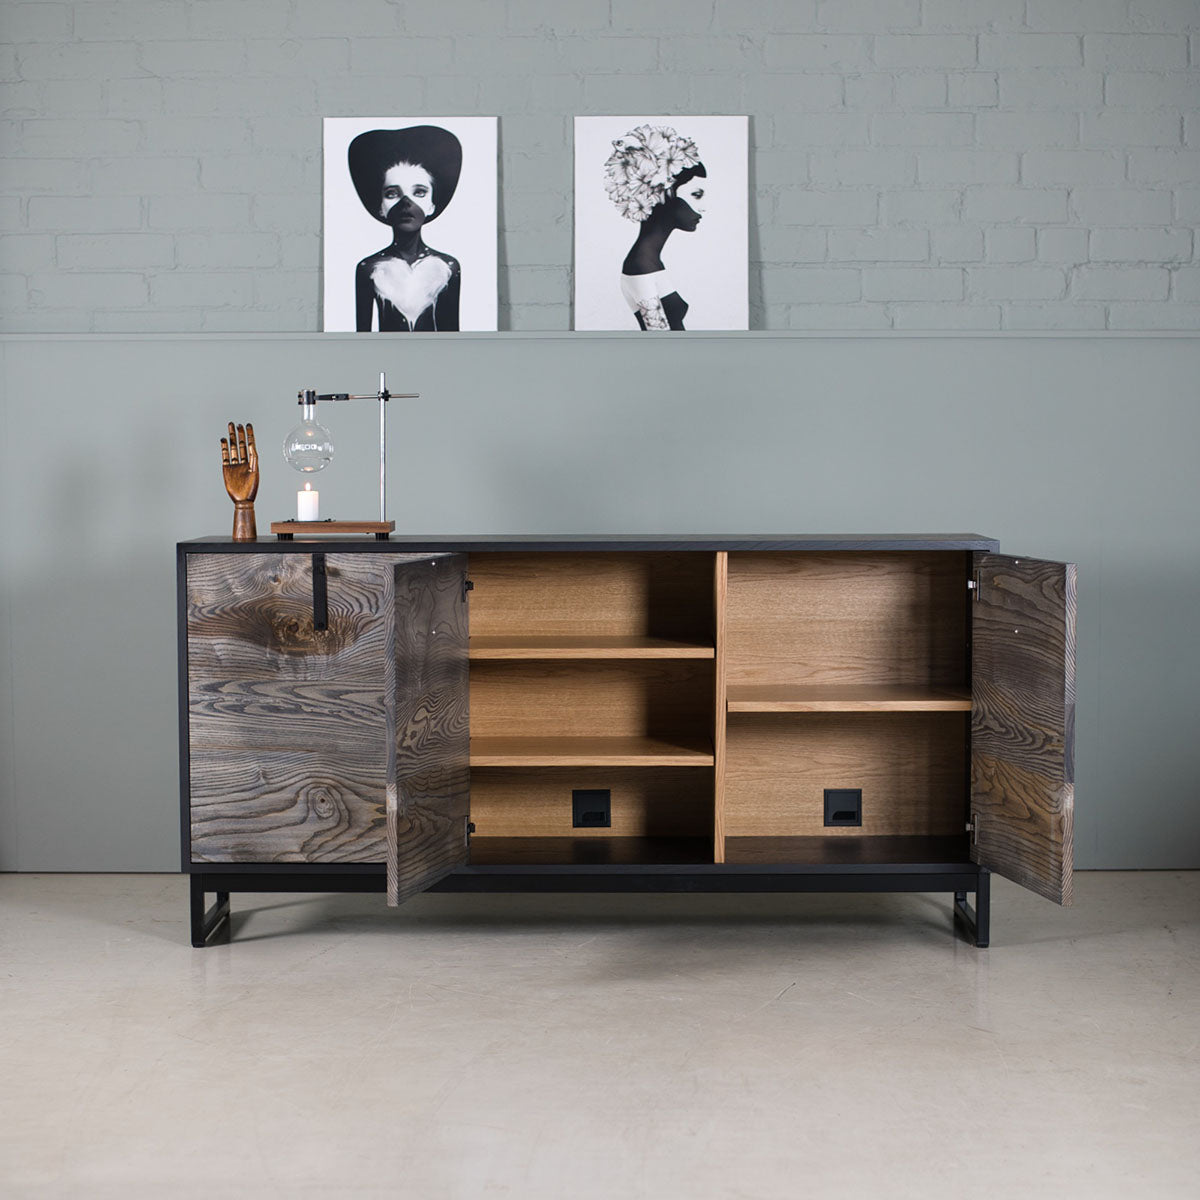 An image of the Oak Sideboard, Oli product available from Koda Studios